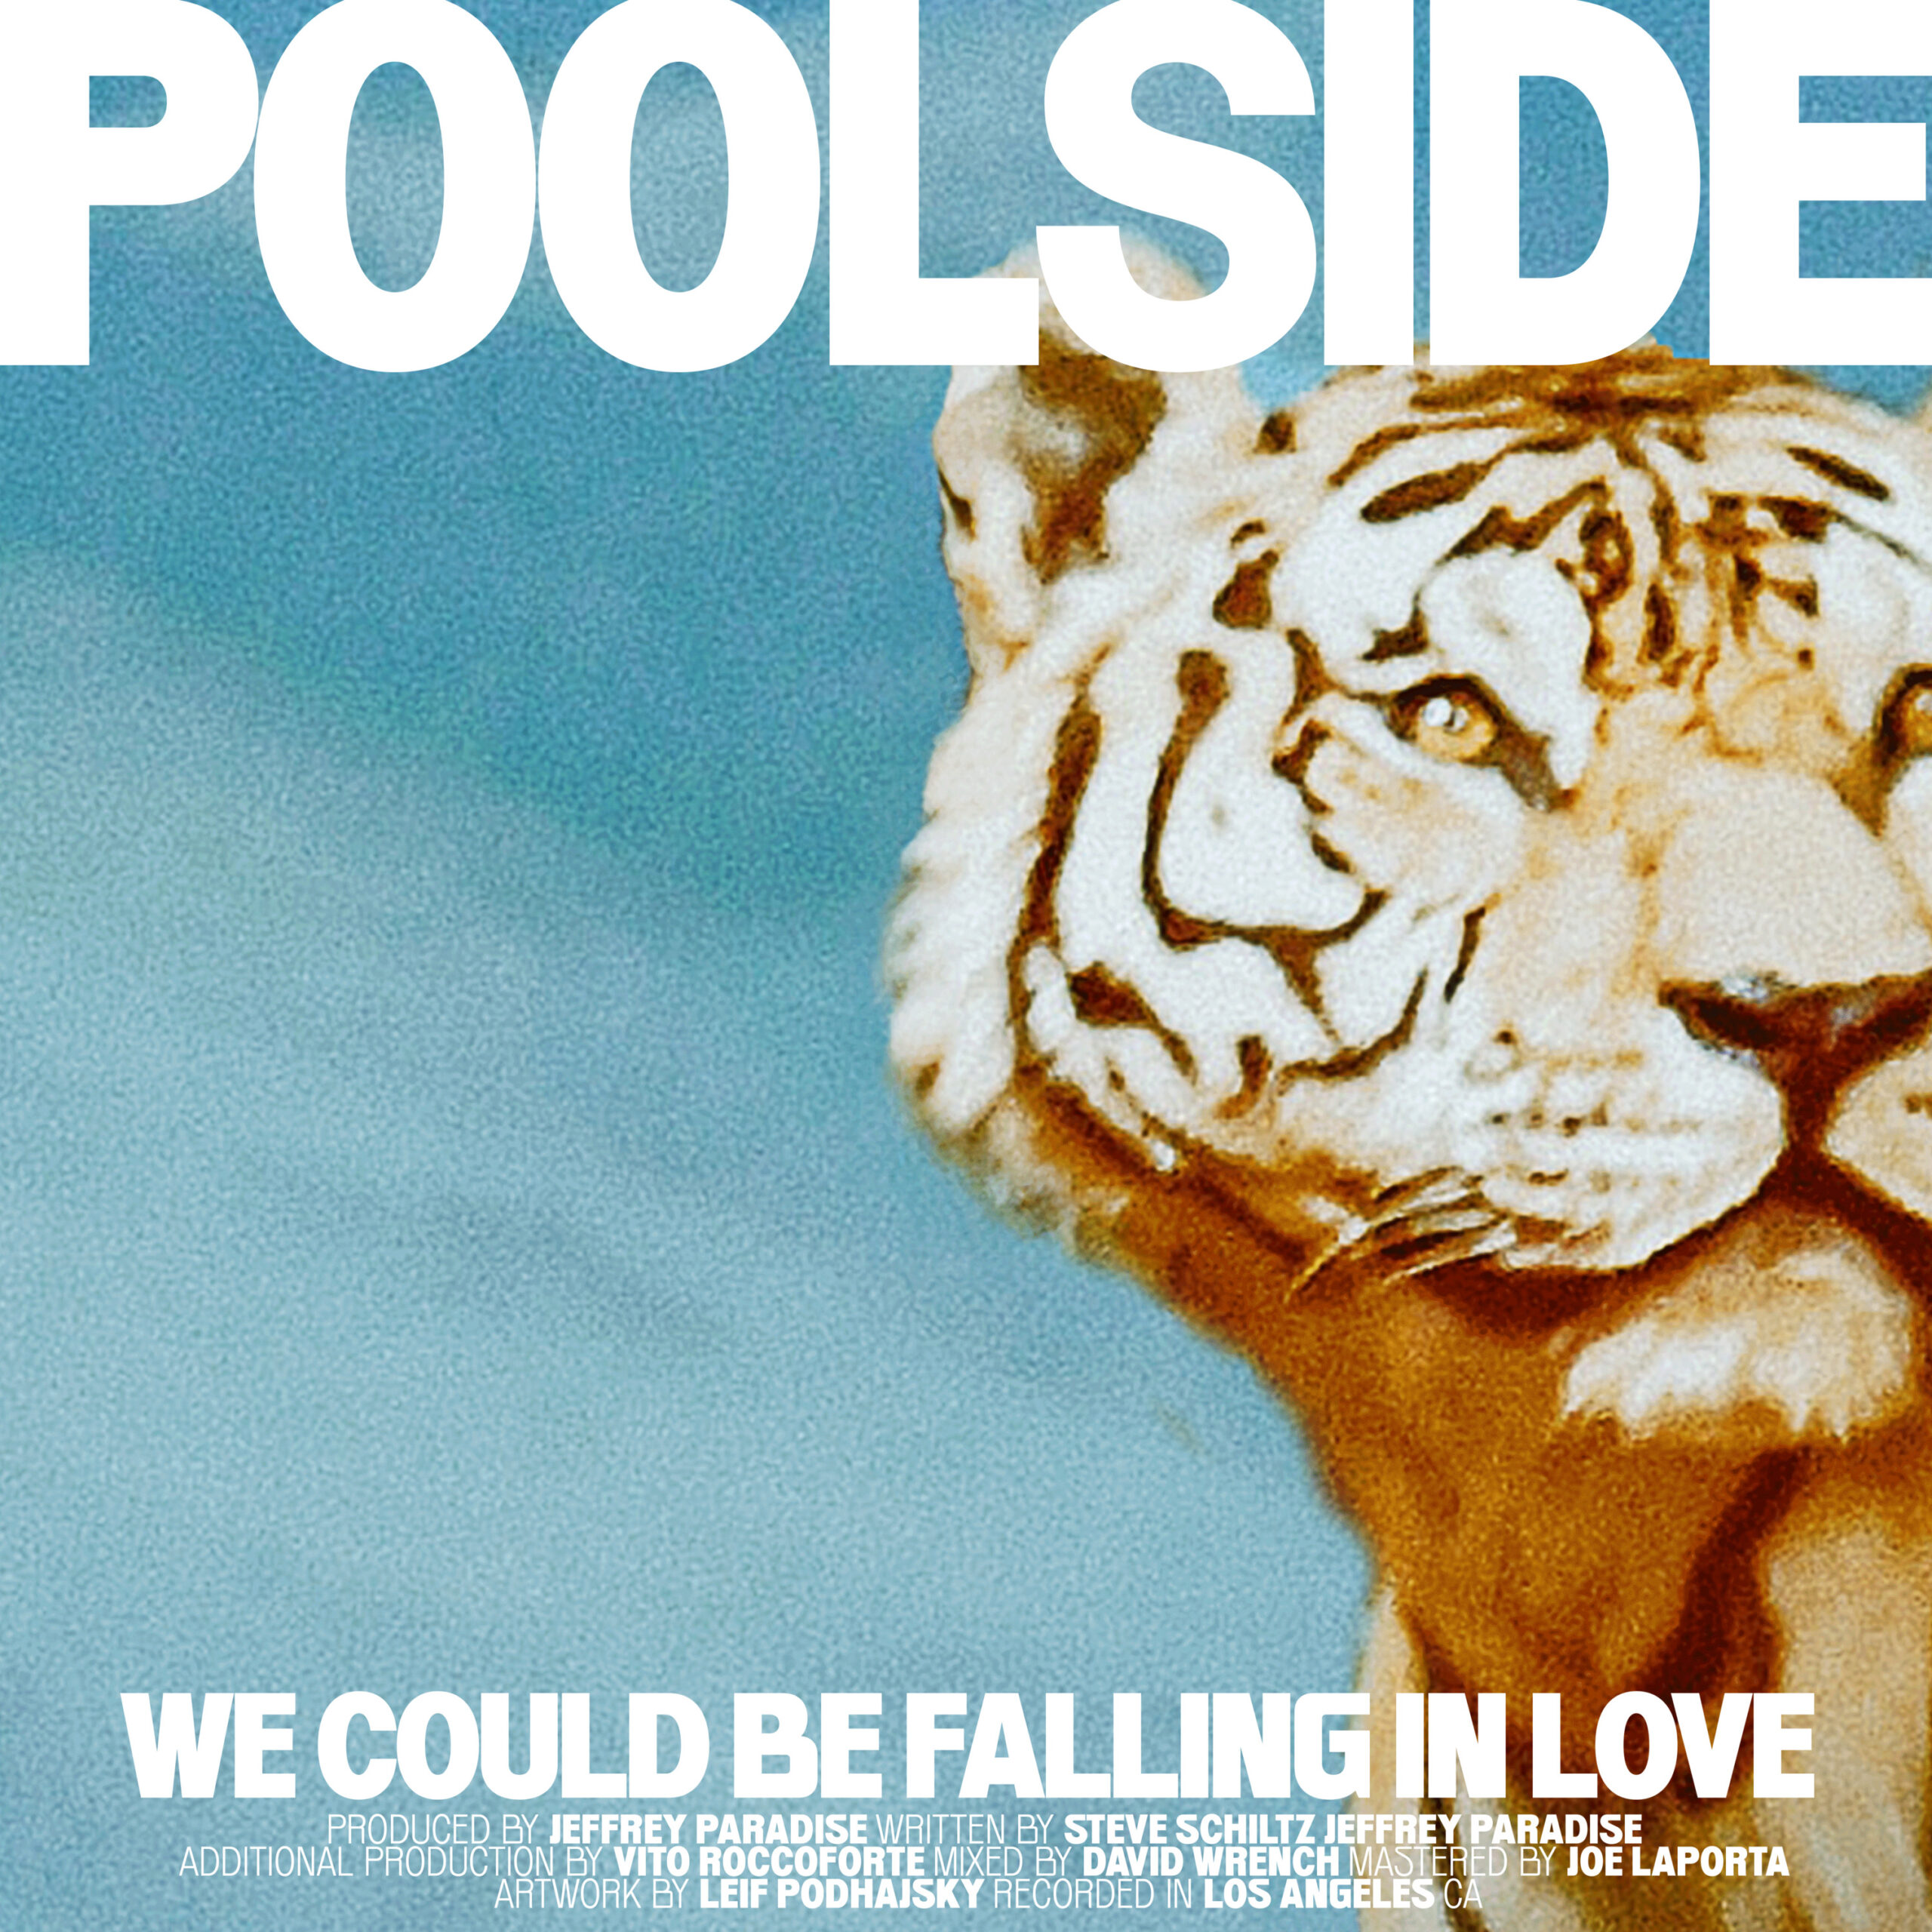 “WE COULD BE FALLING IN LOVE” THE NEW SINGLE FROM POOLSIDE OUT TODAY ON NINJA TUNE/COUNTER RECORDS